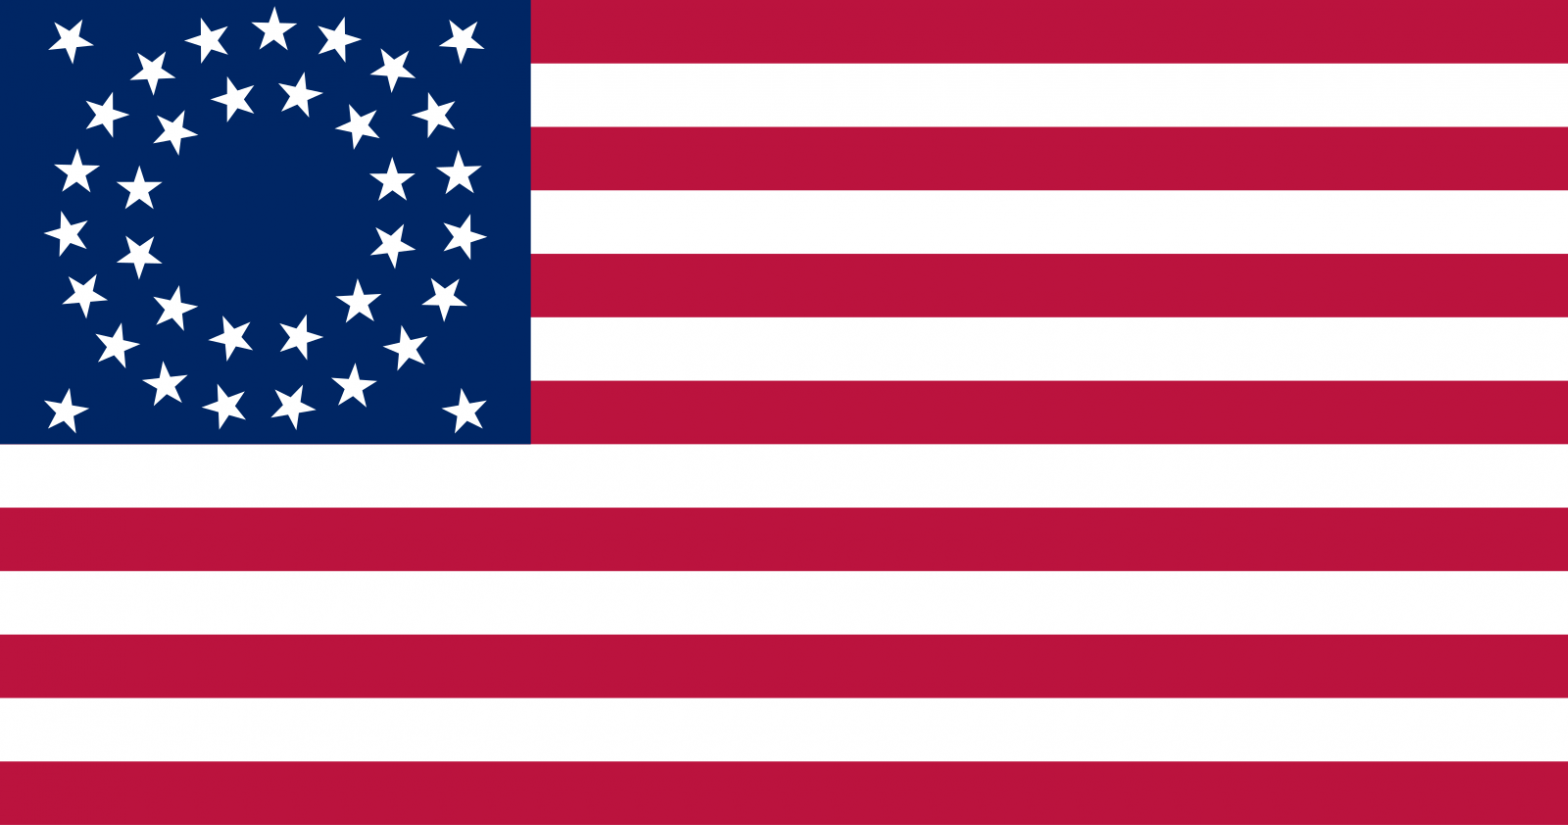 A 35-star version of the US Flag